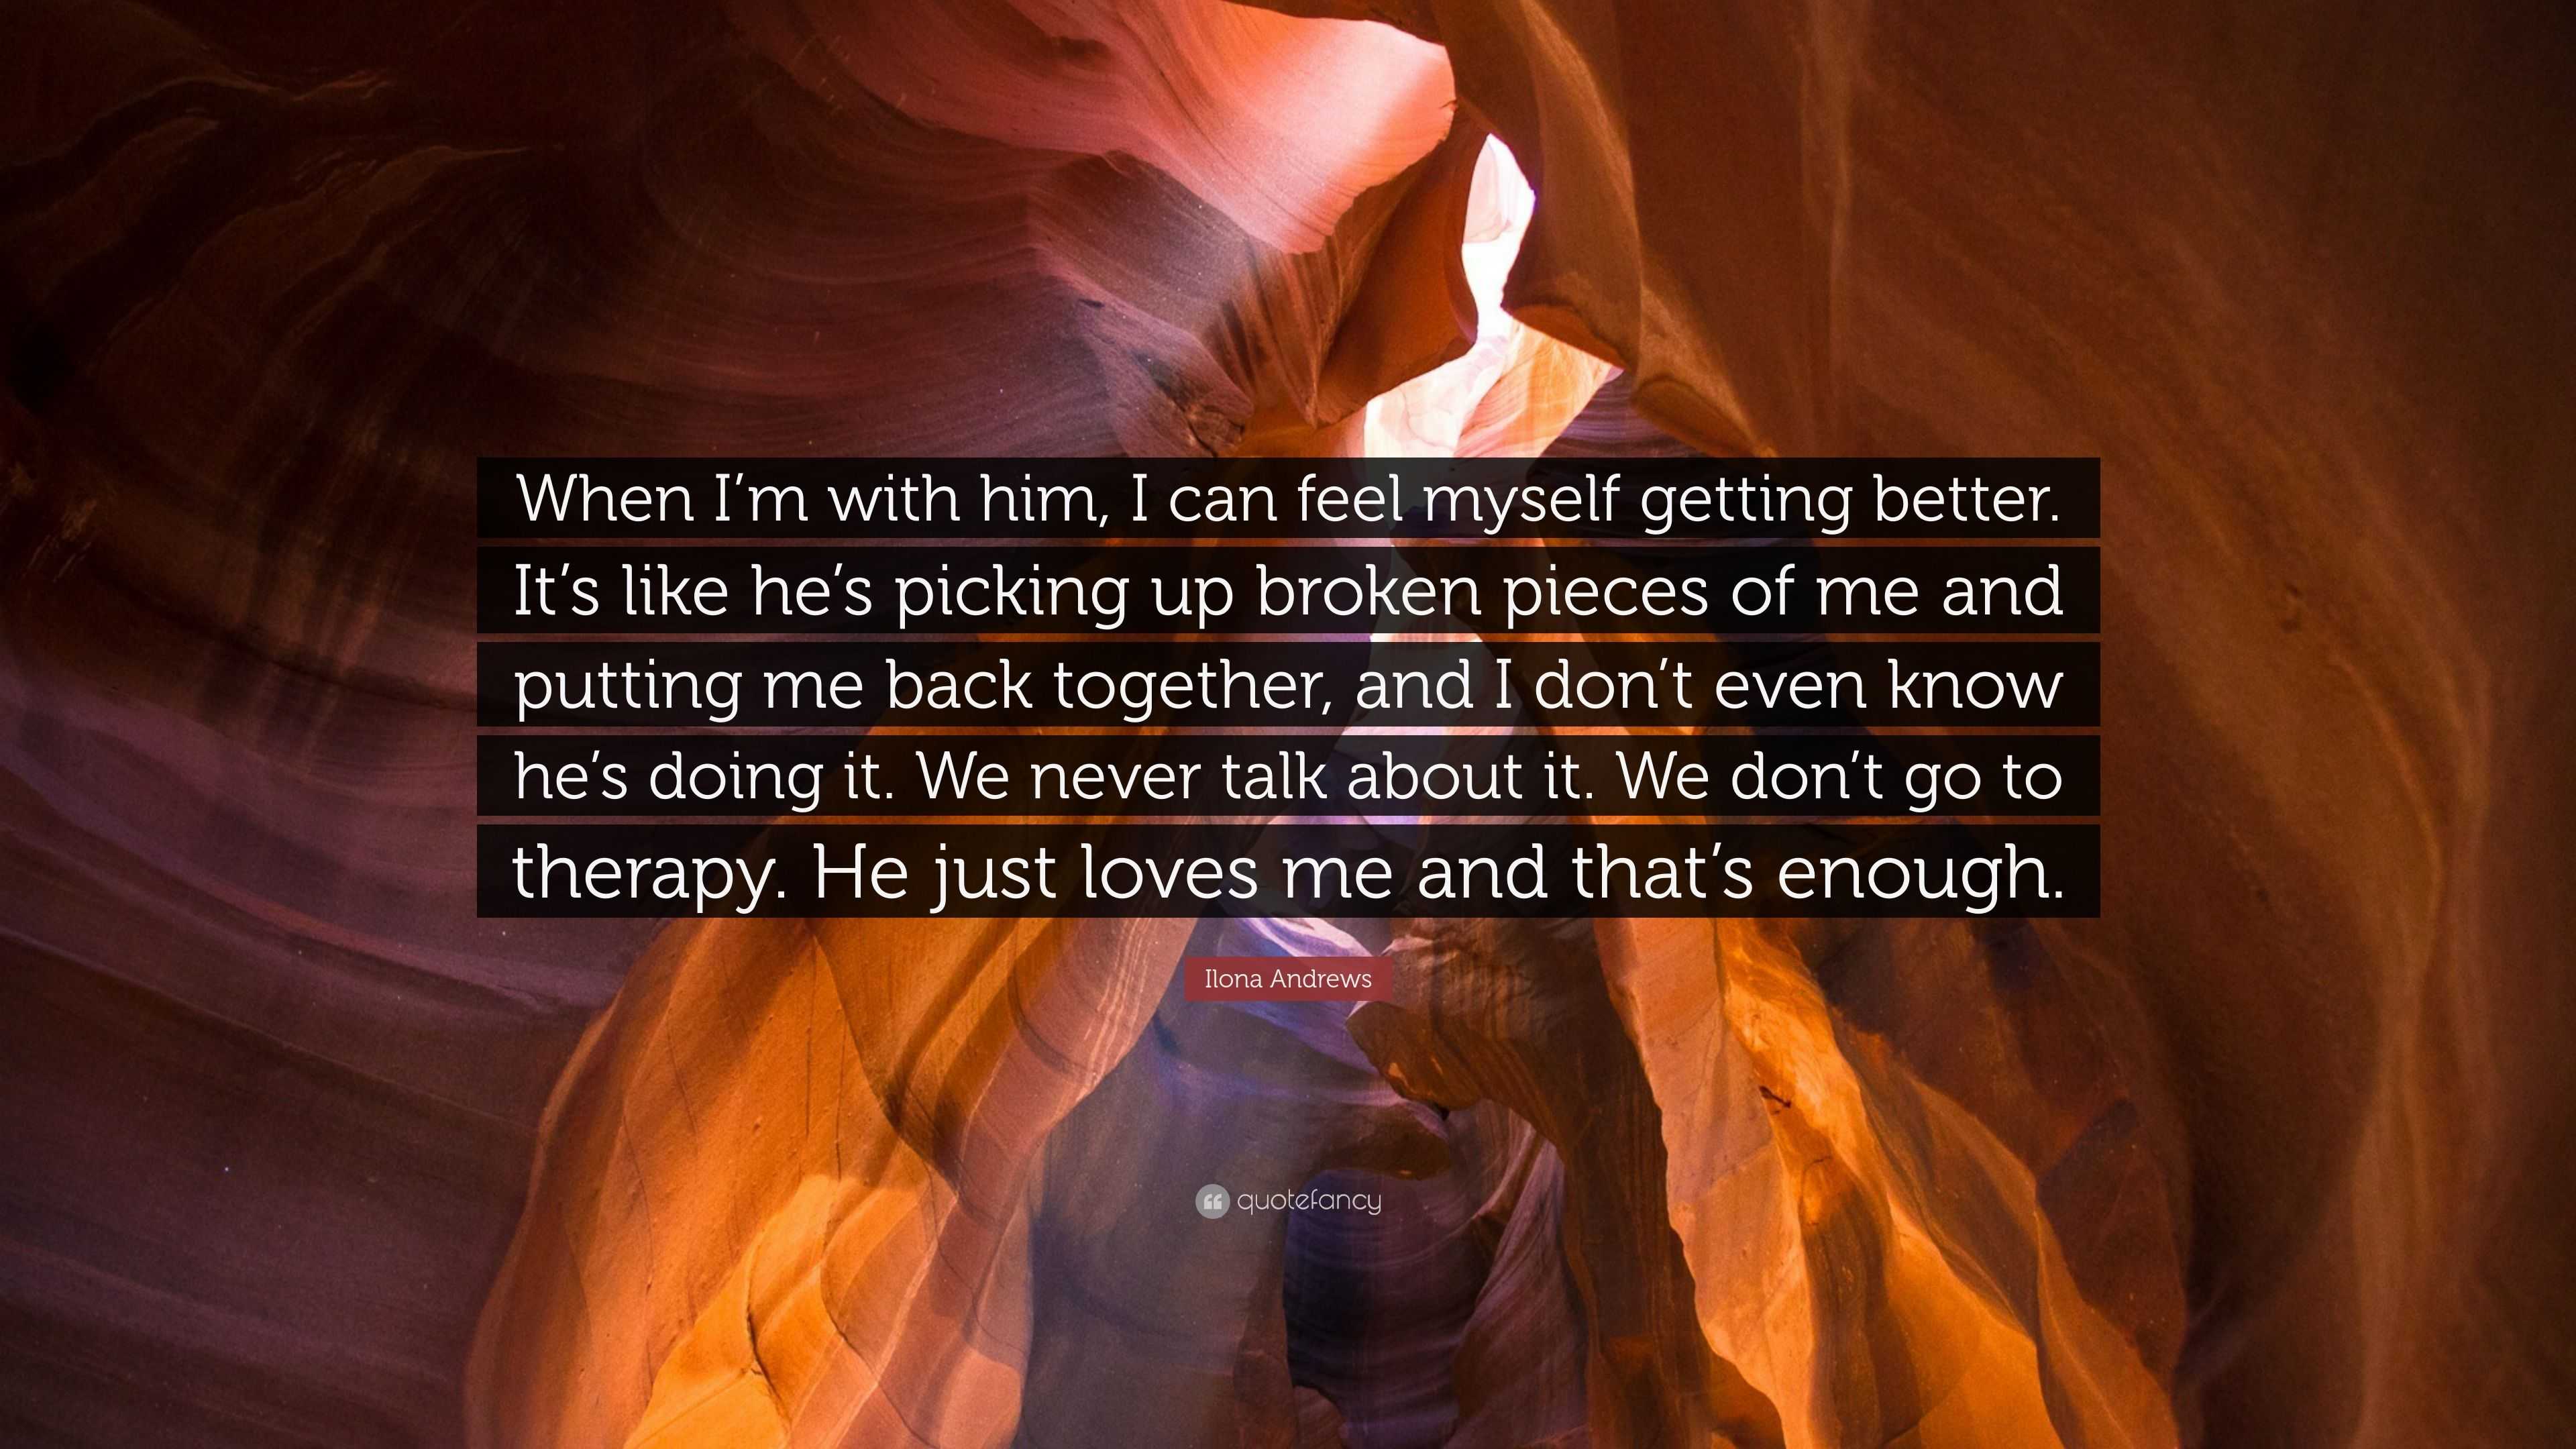 Ilona Andrews quote: When I'm with him, I can feel myself getting